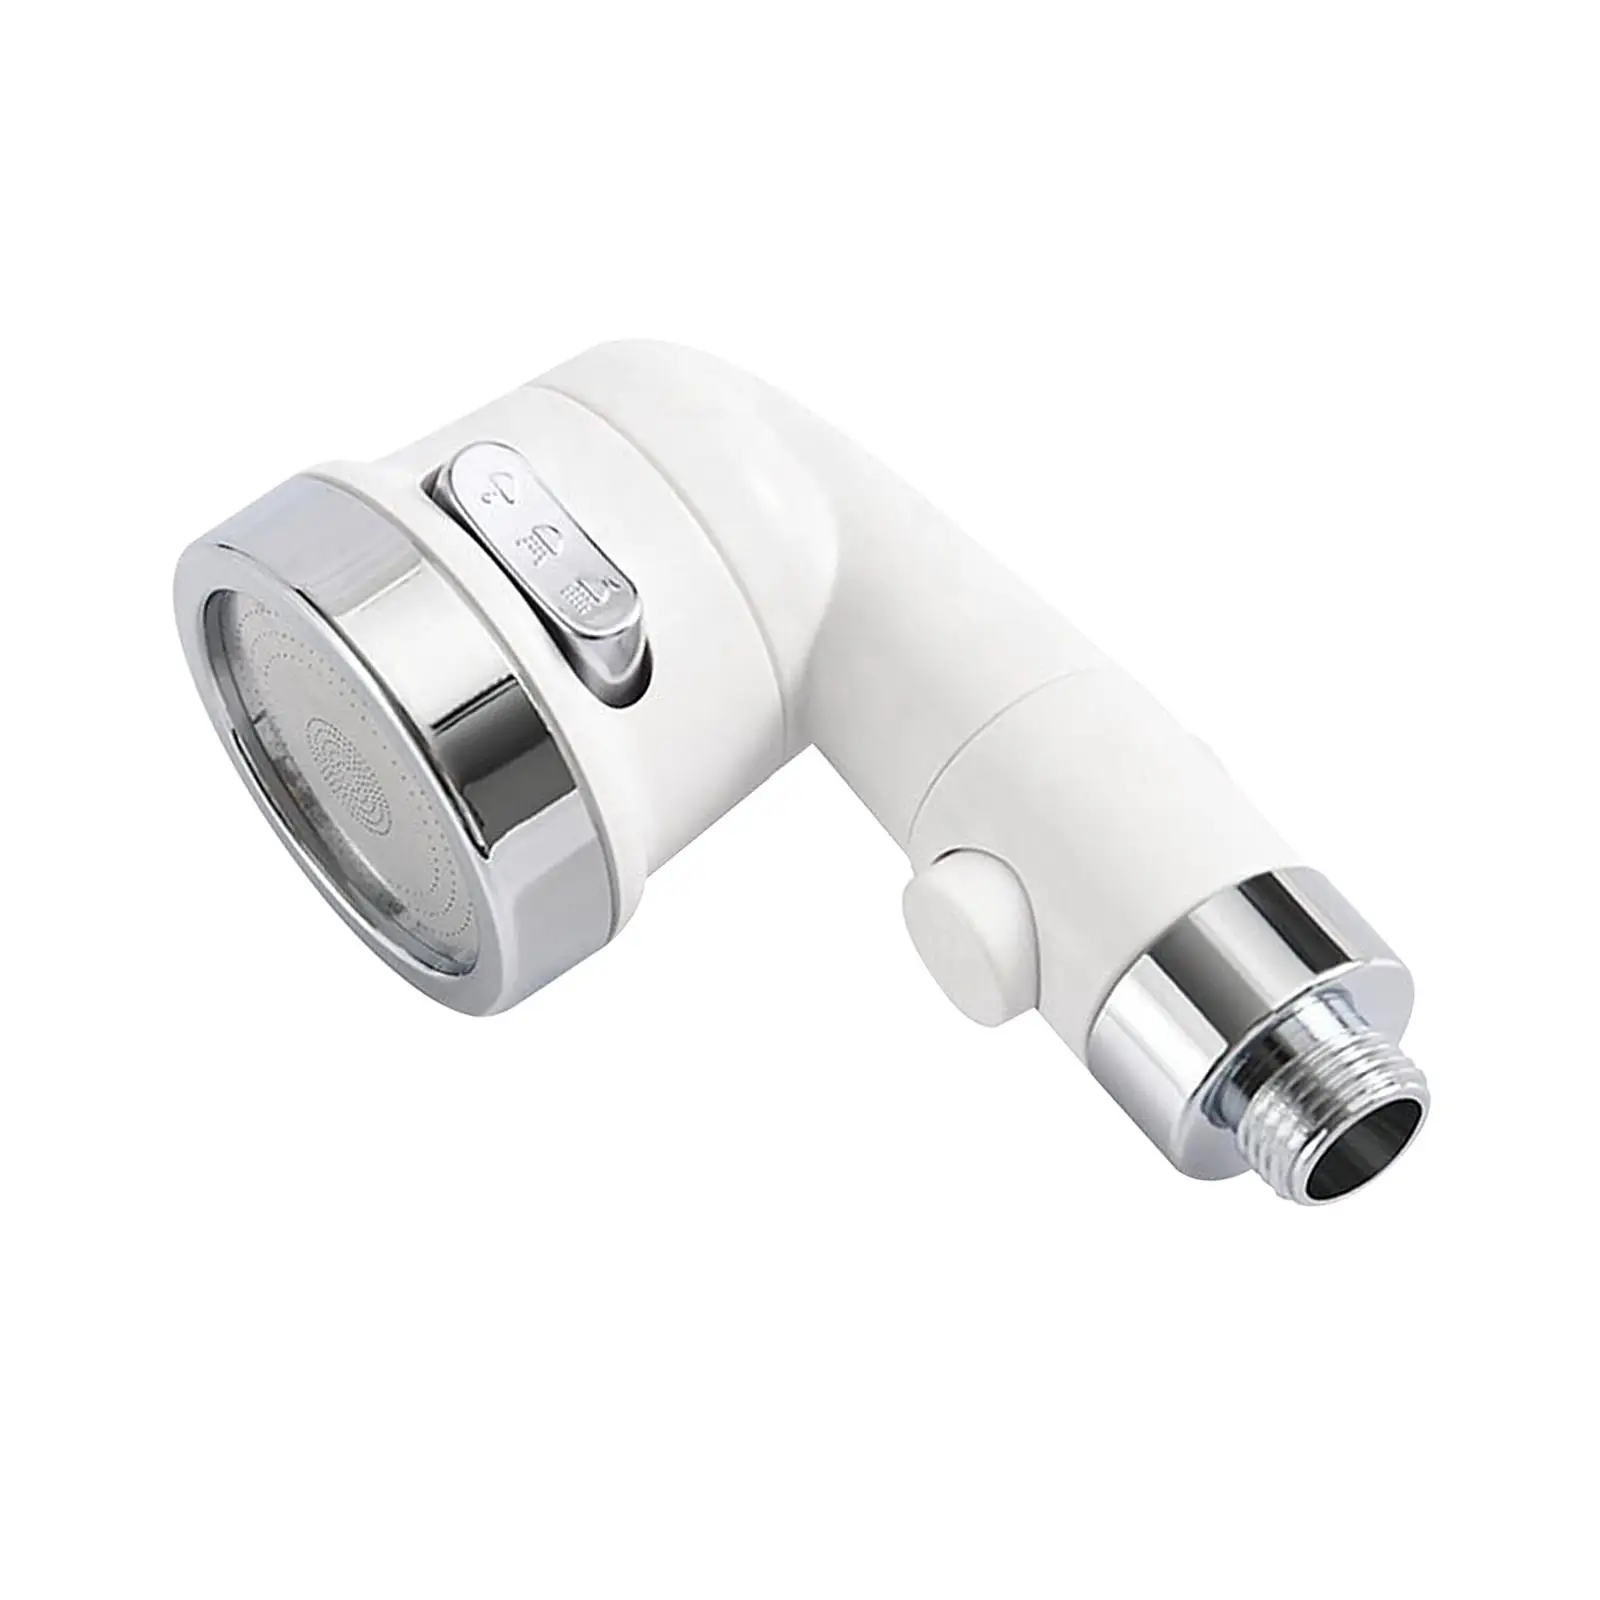 Shower Nozzle Sprinkler and Switch for Bathroom Home Accessories